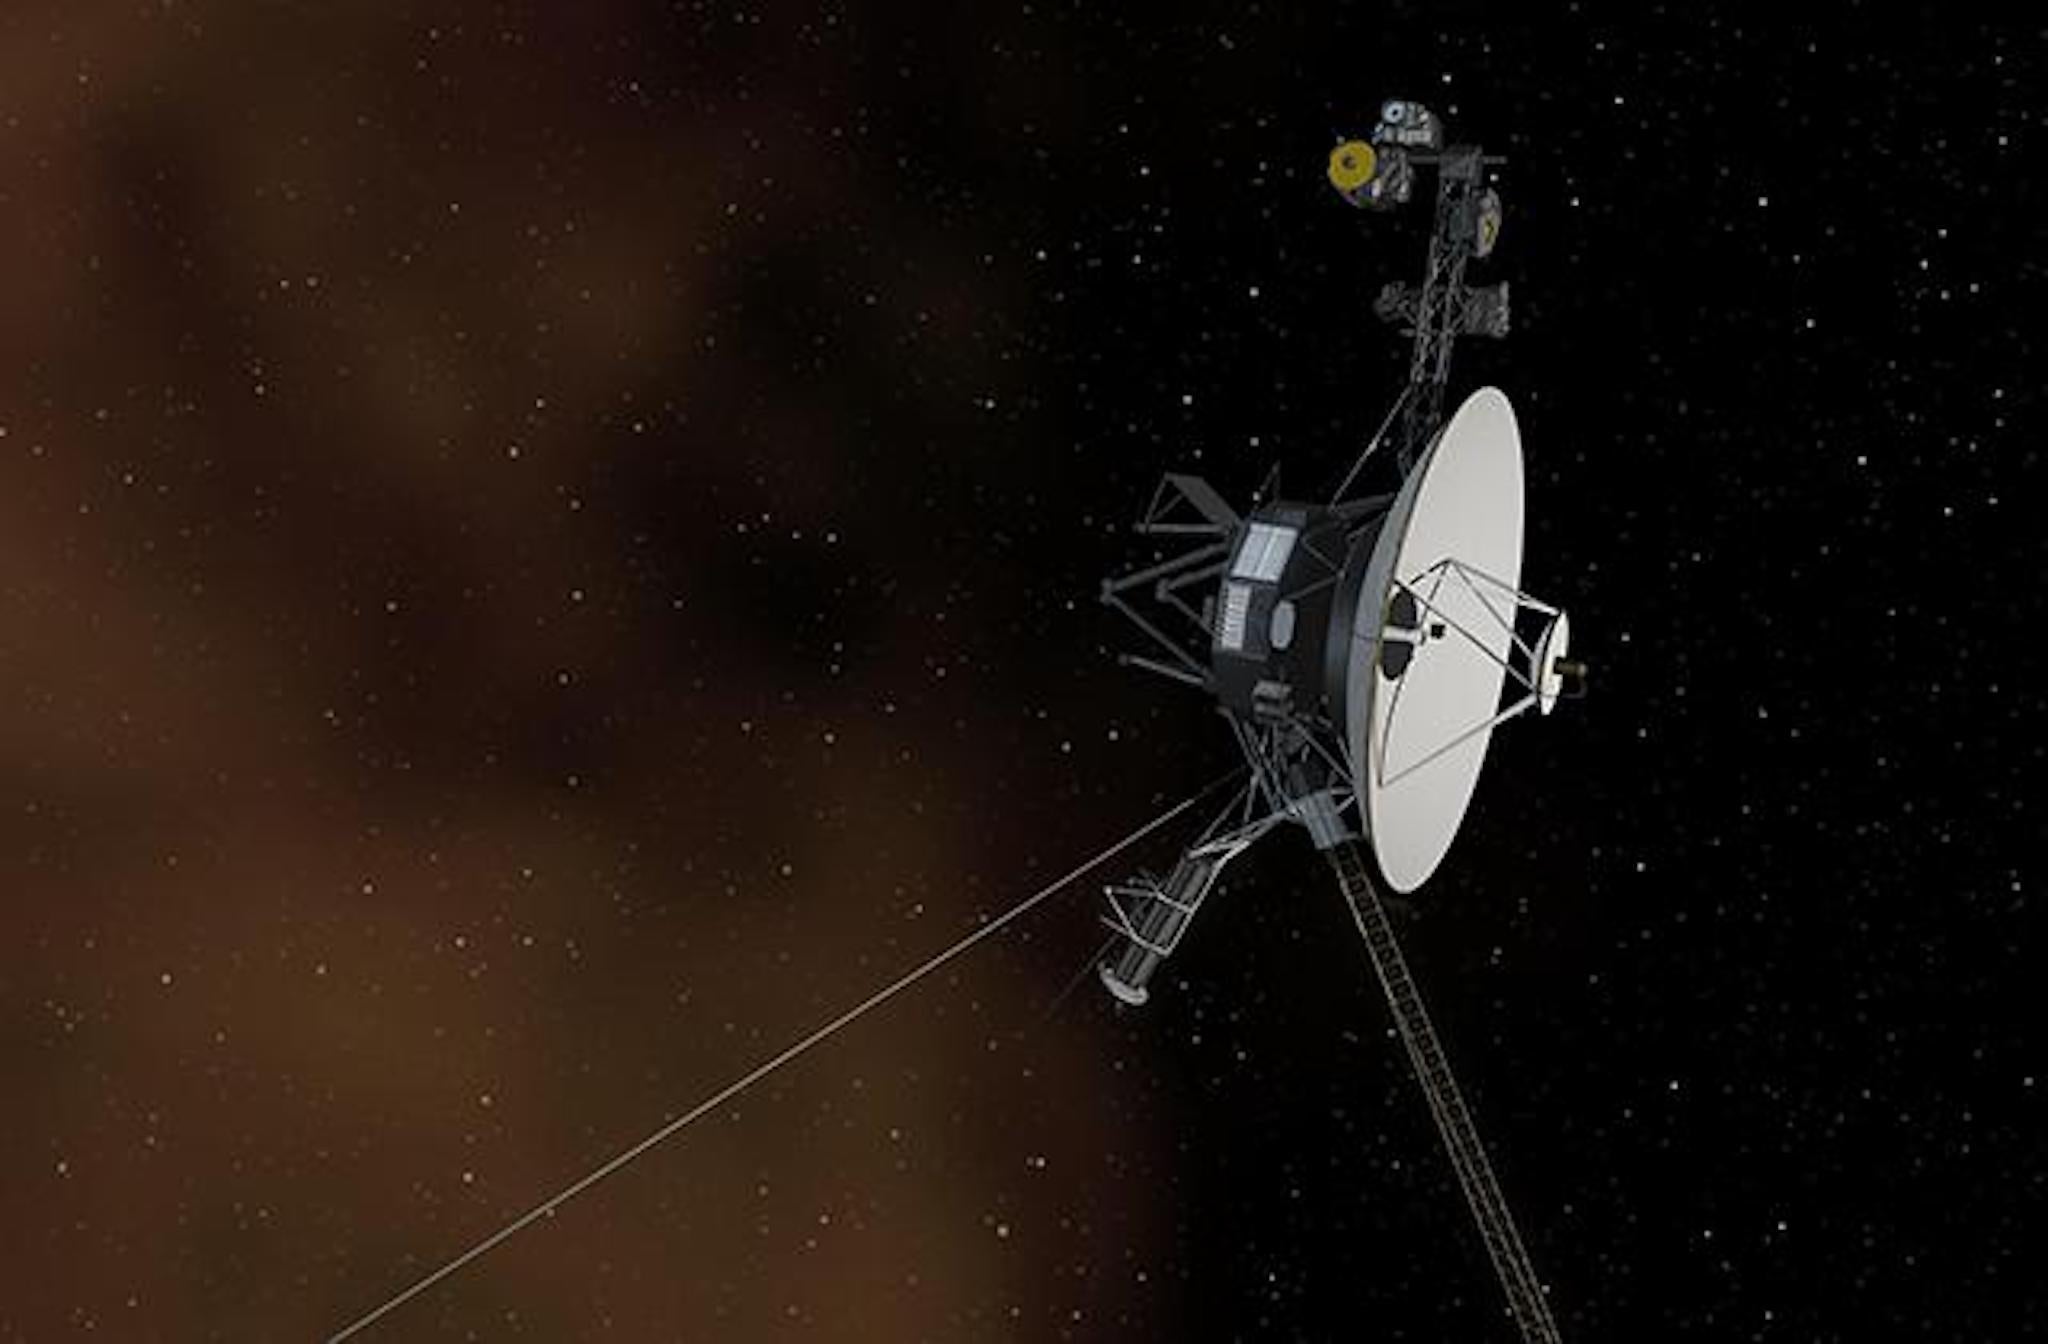 The Voyager spacecraft is finding completely new “unique physics” outside the Solar System